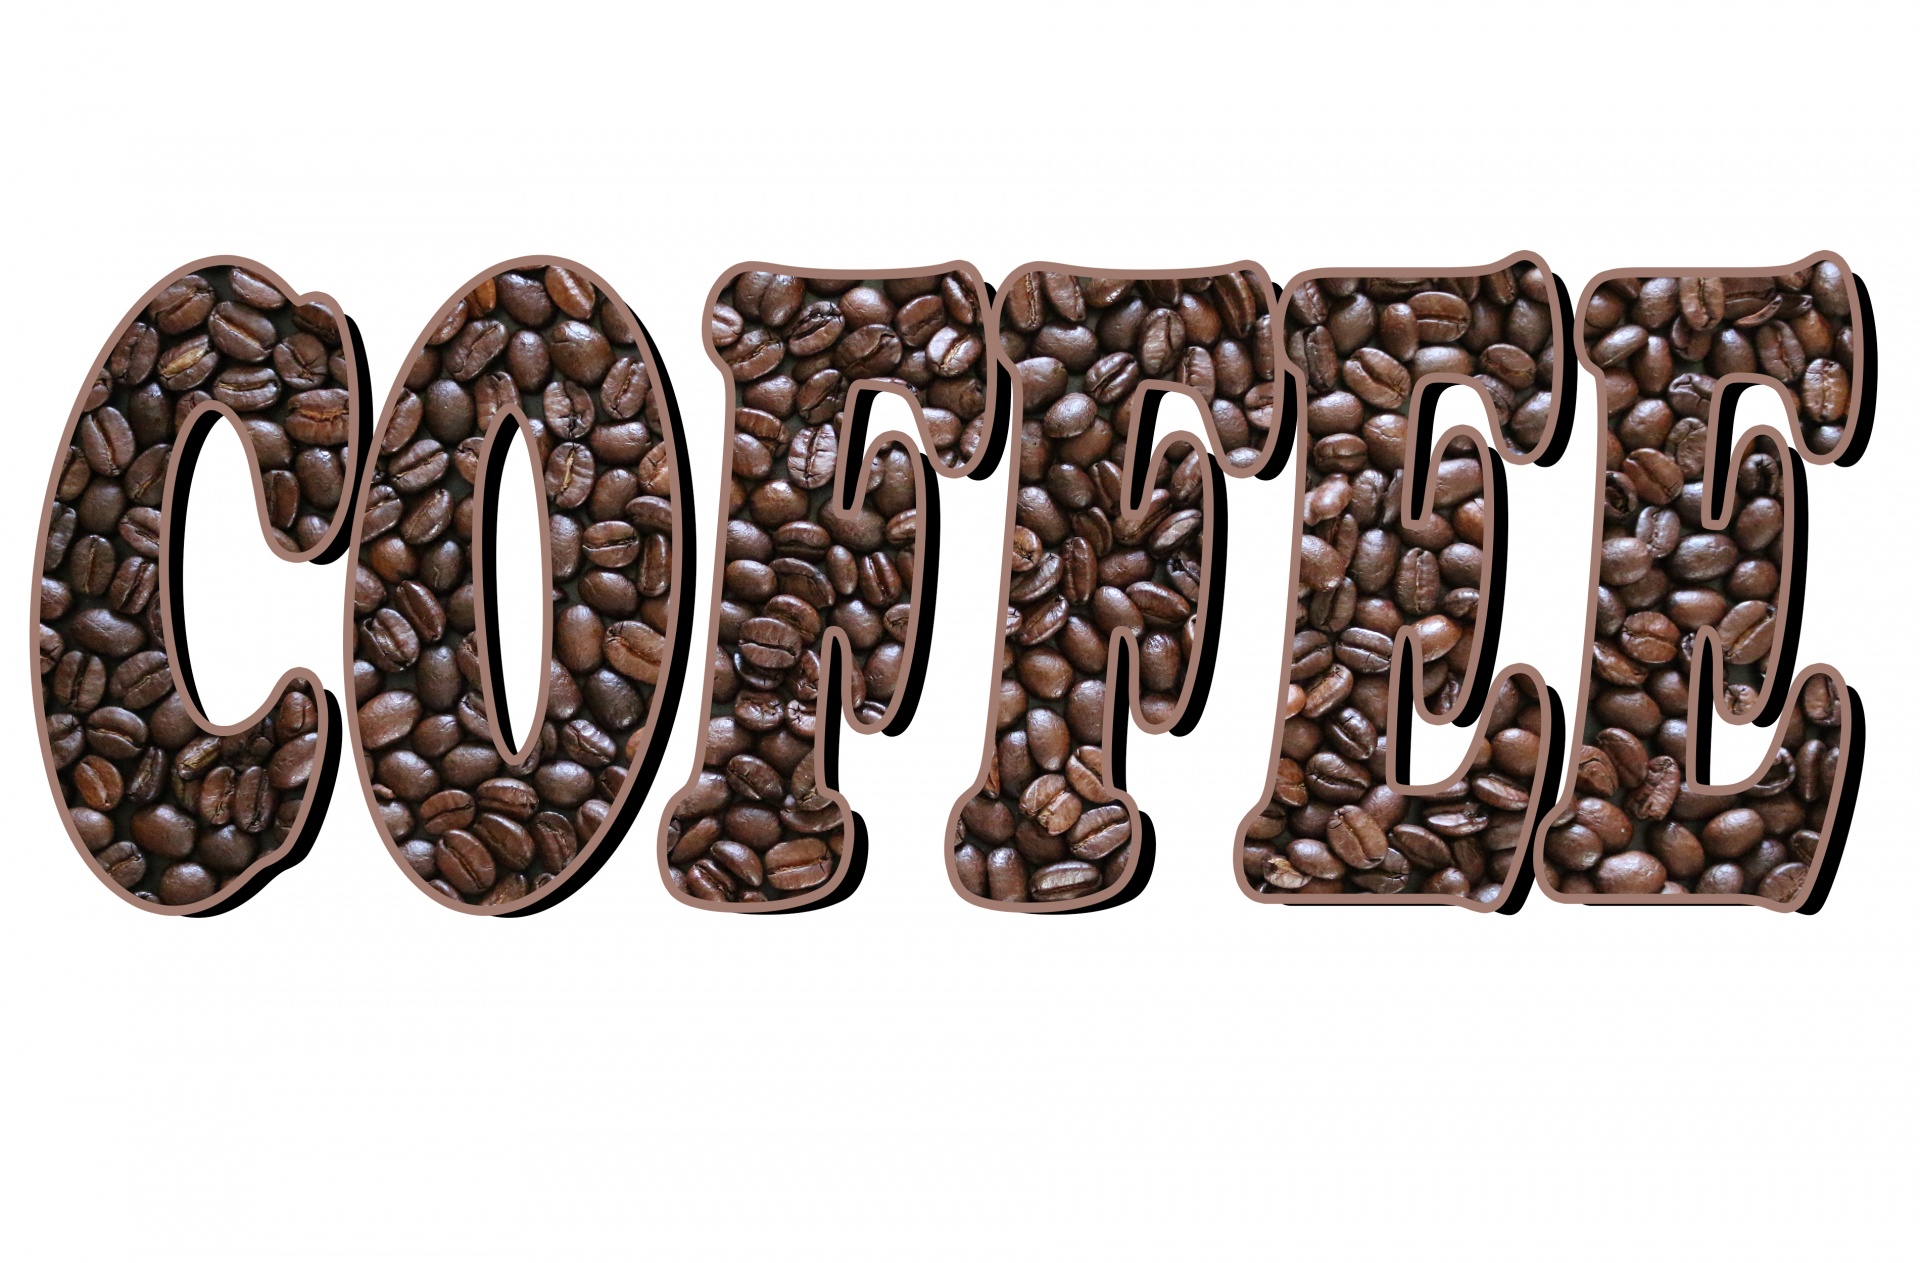 Coffee text filled with coffee beans on white background